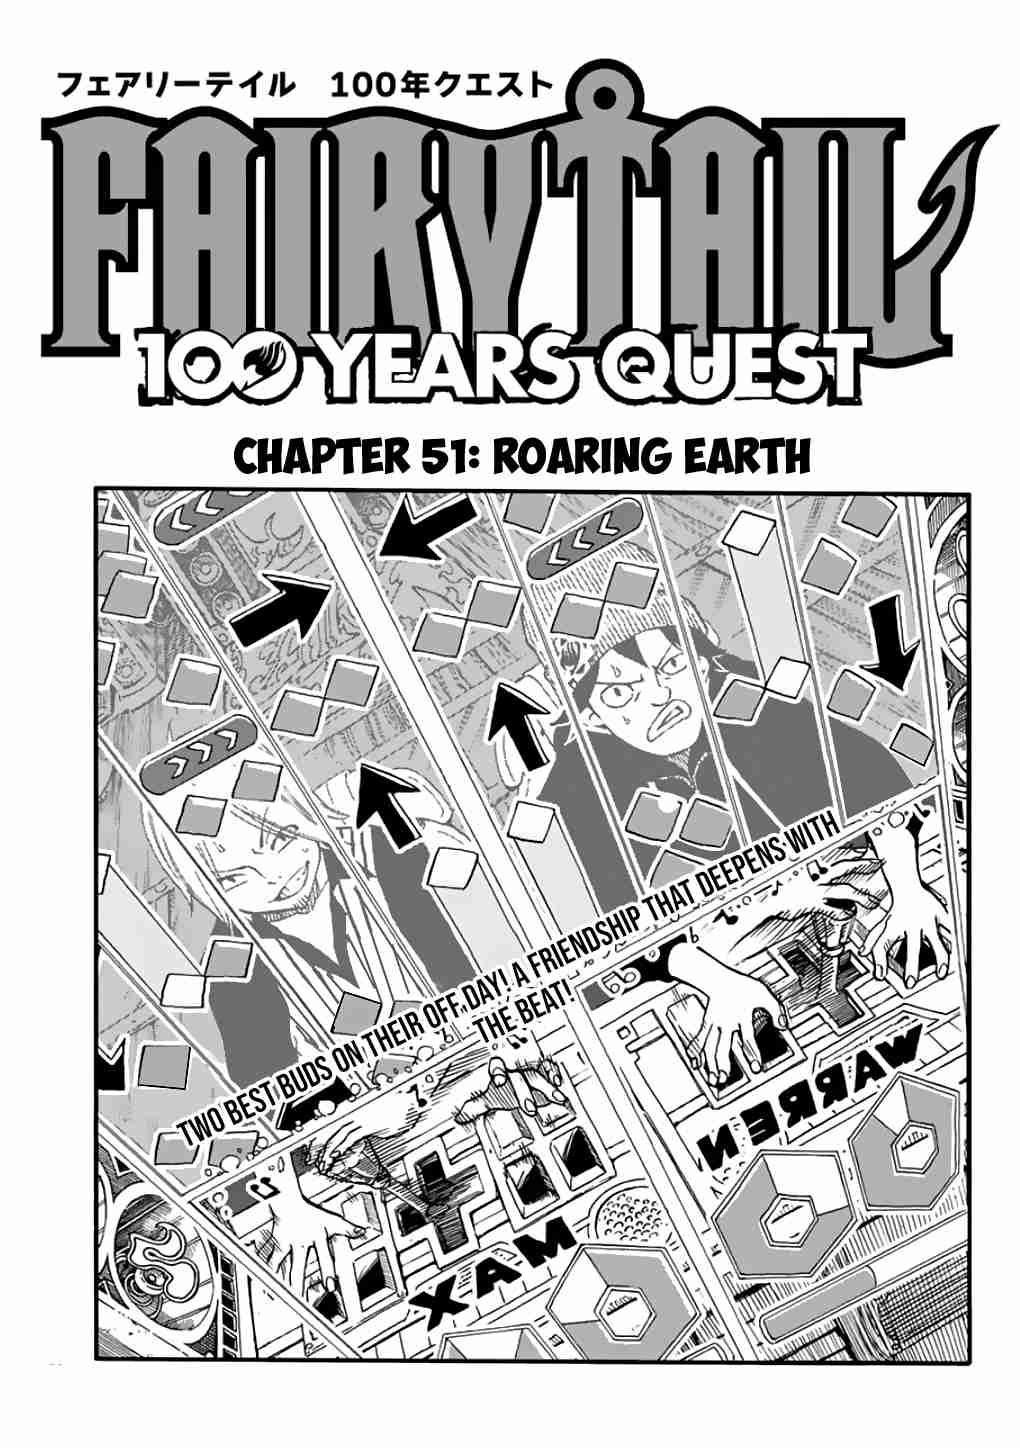 Fairy Tail: 100 Years Quest Ch. 51 Roaring Earth